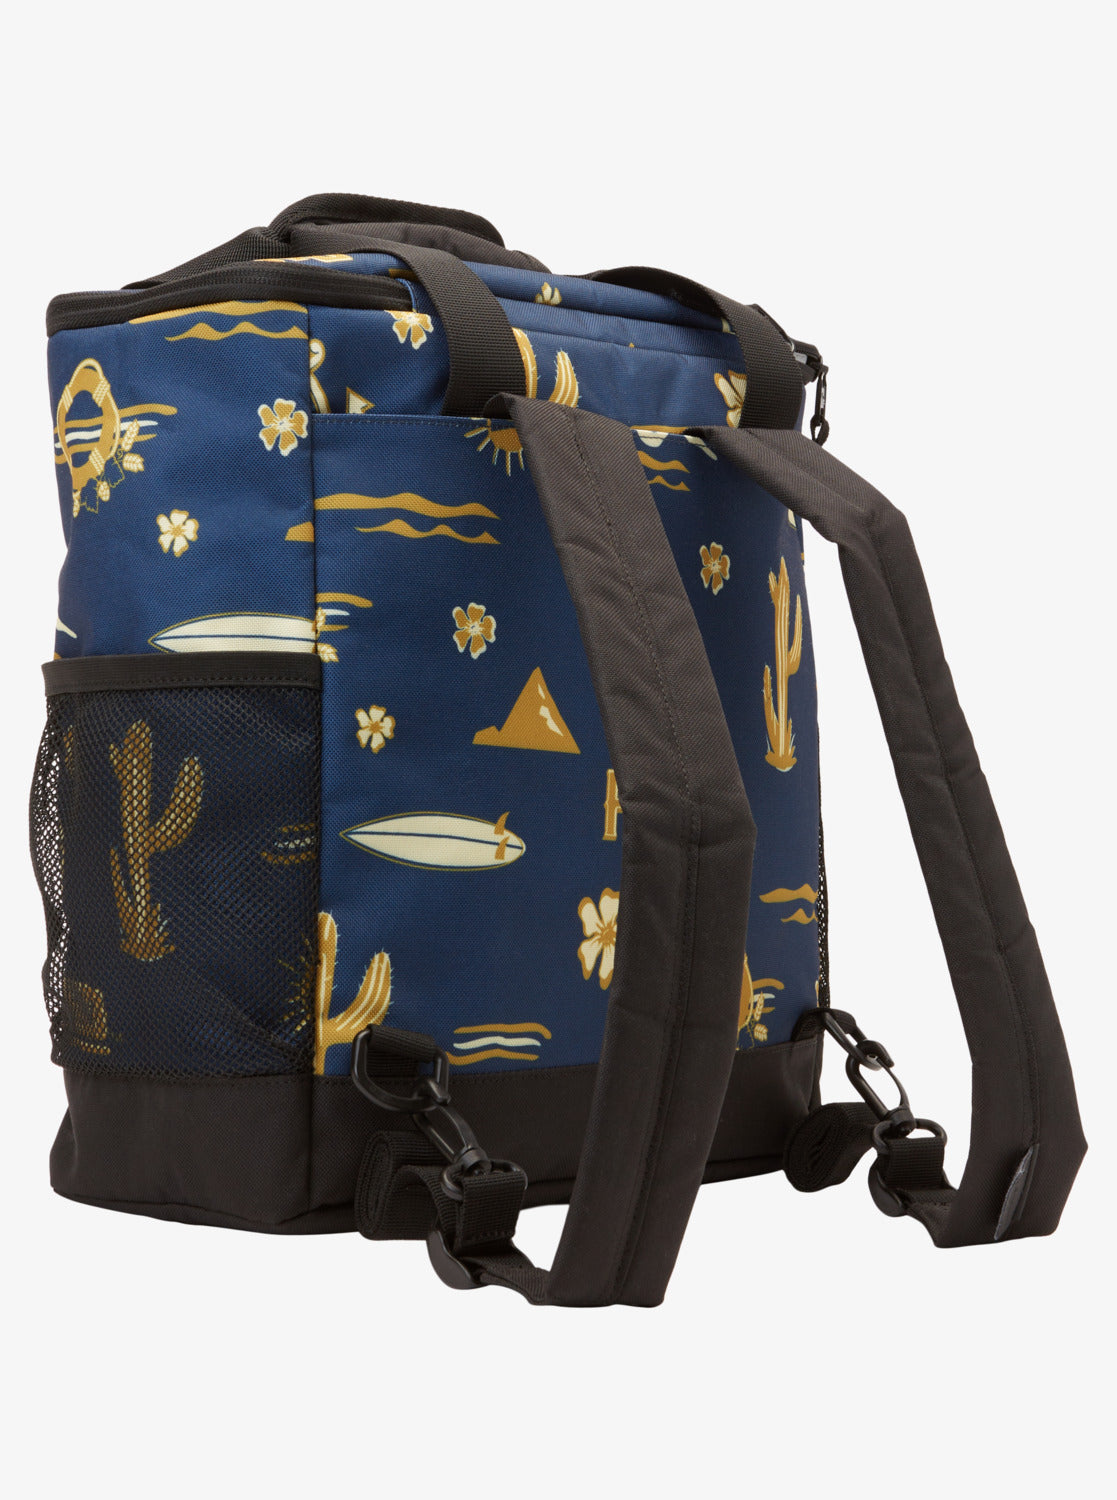 Quiksilver X  Pacifico Seabeach Cooler Backpack.